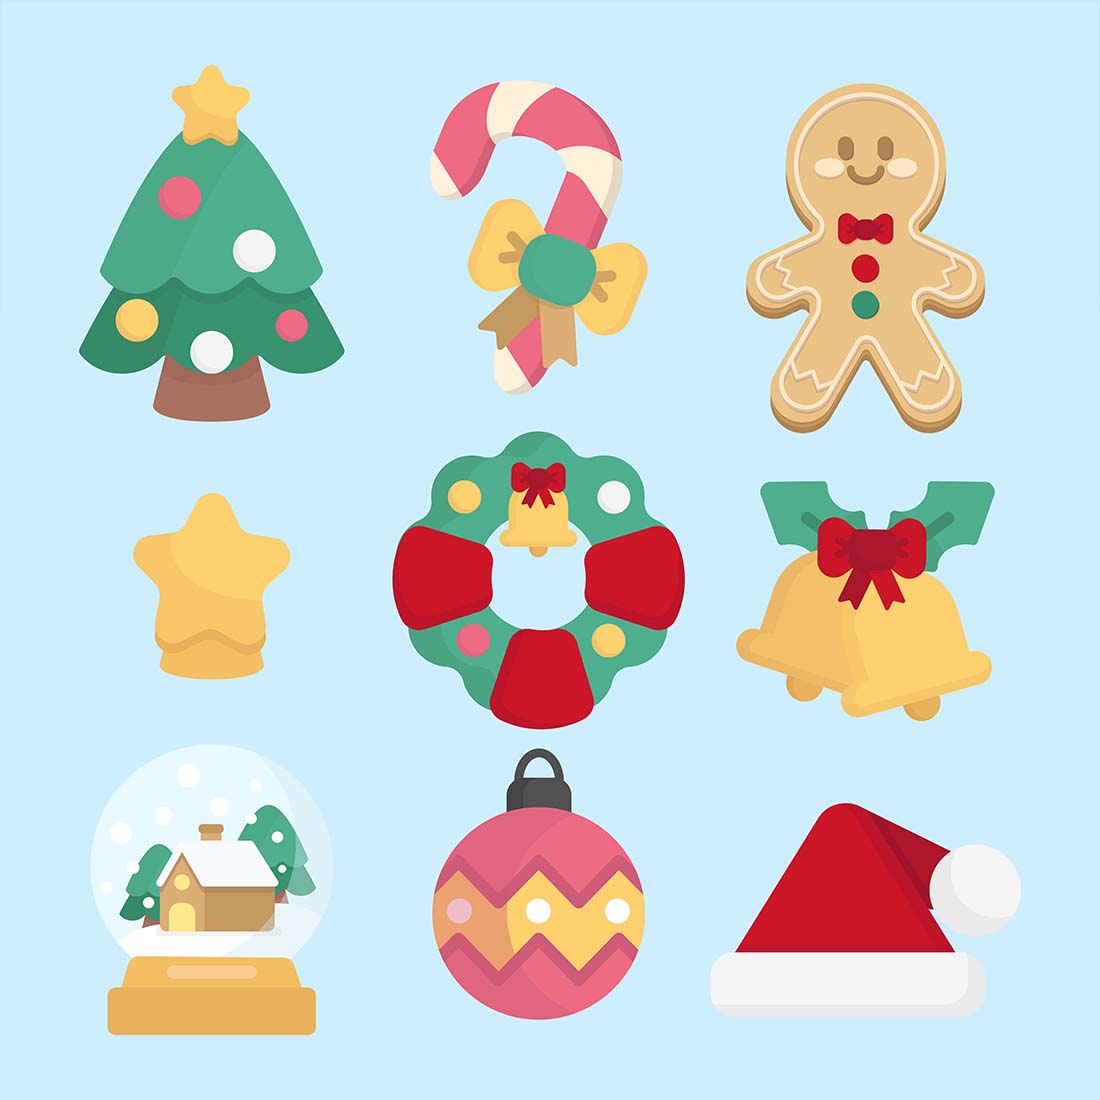 Cartoon Christmas Decoration Flat Style Vector cover image.